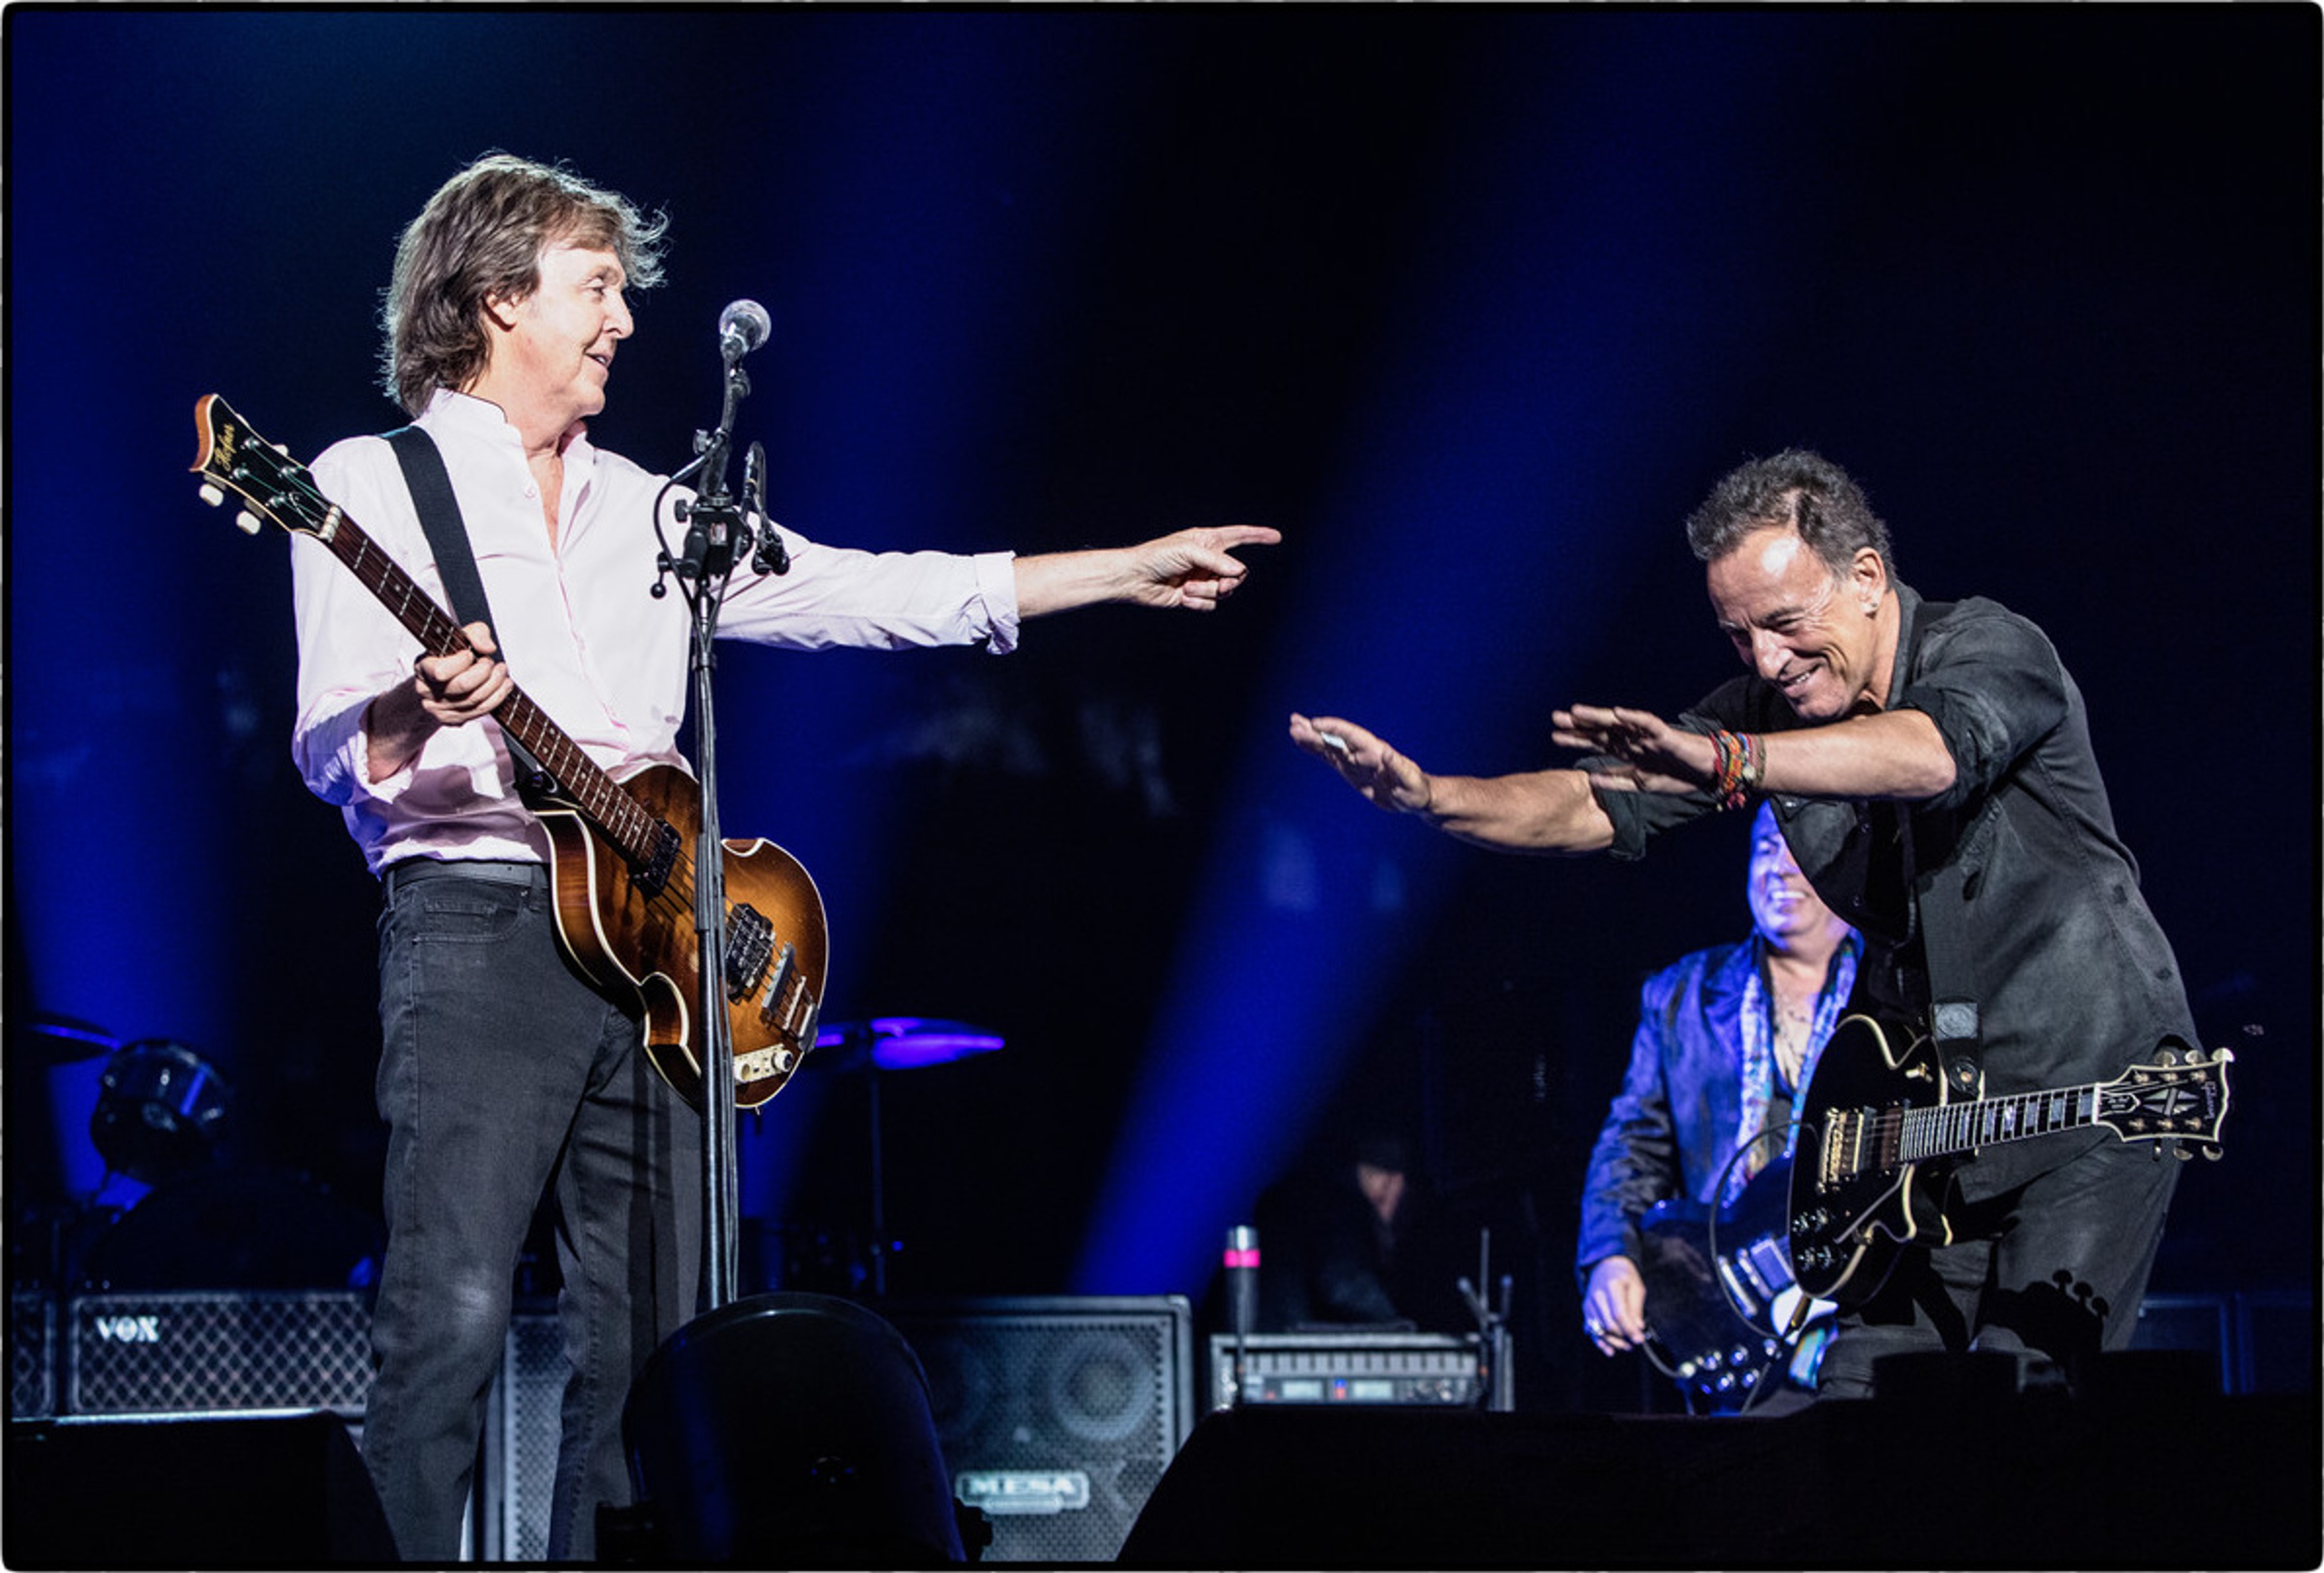 Paul rocked out with Bruce Springsteen on the 15th September at Madison Square Garden